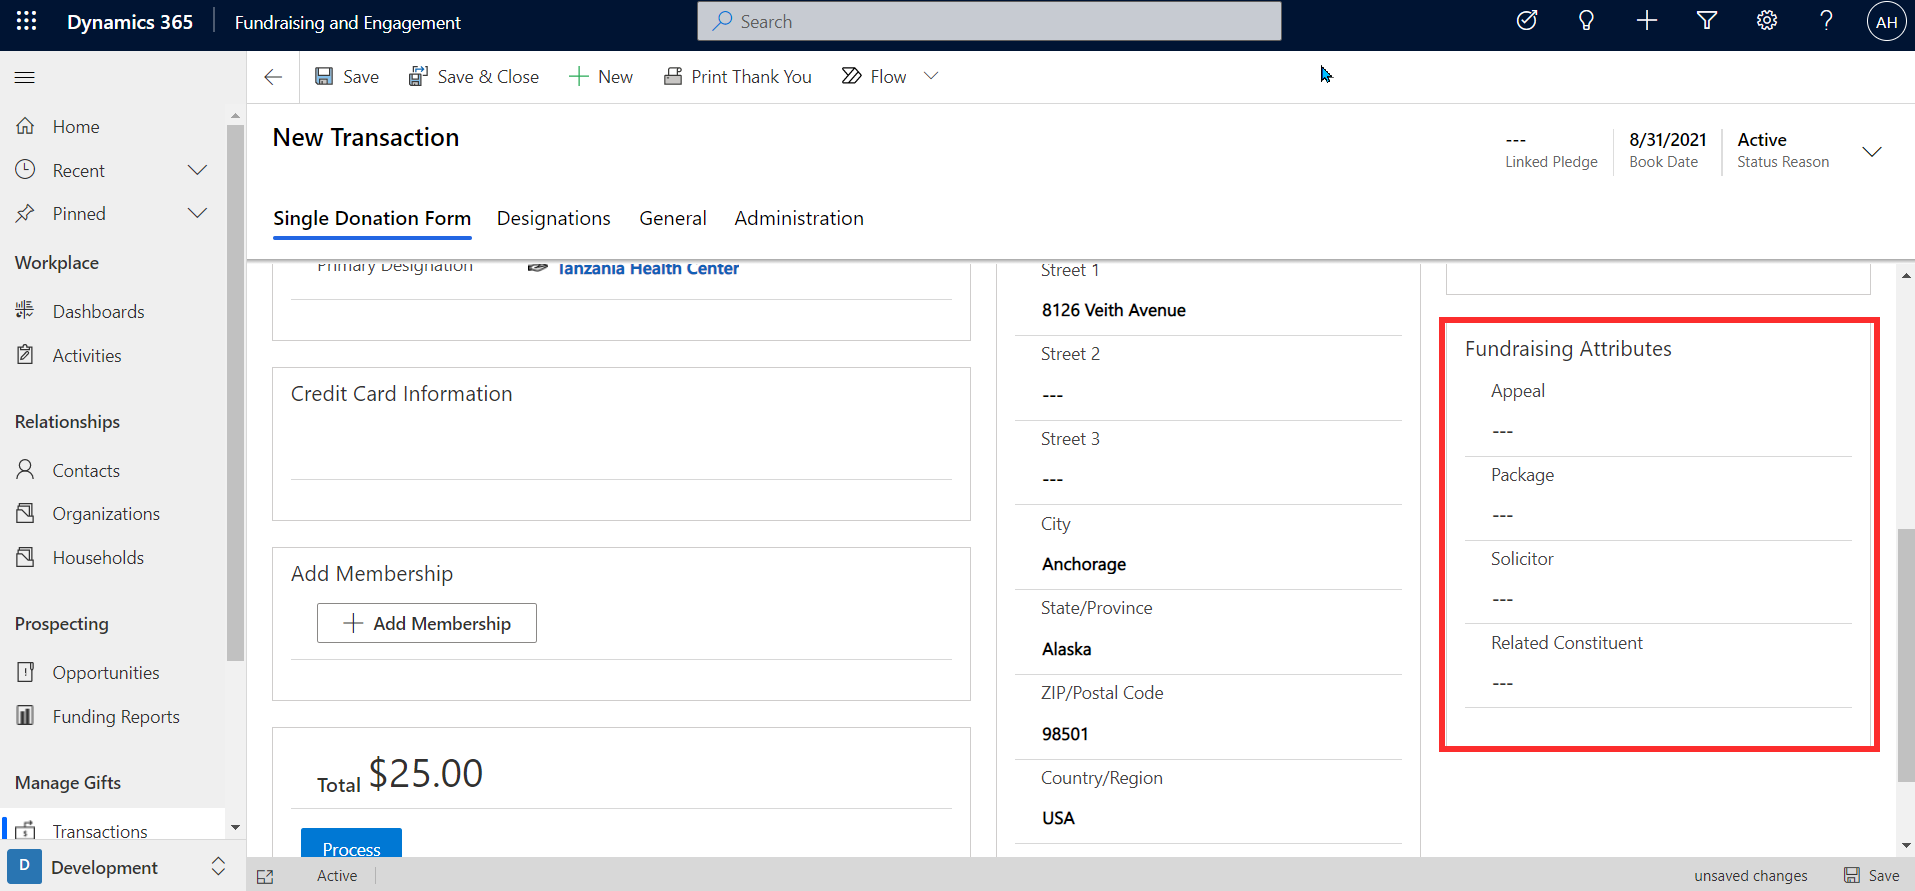 Screenshot of Dynamics 365 Fundraising and Engagement with the Fundraising Attributes section highlighted.